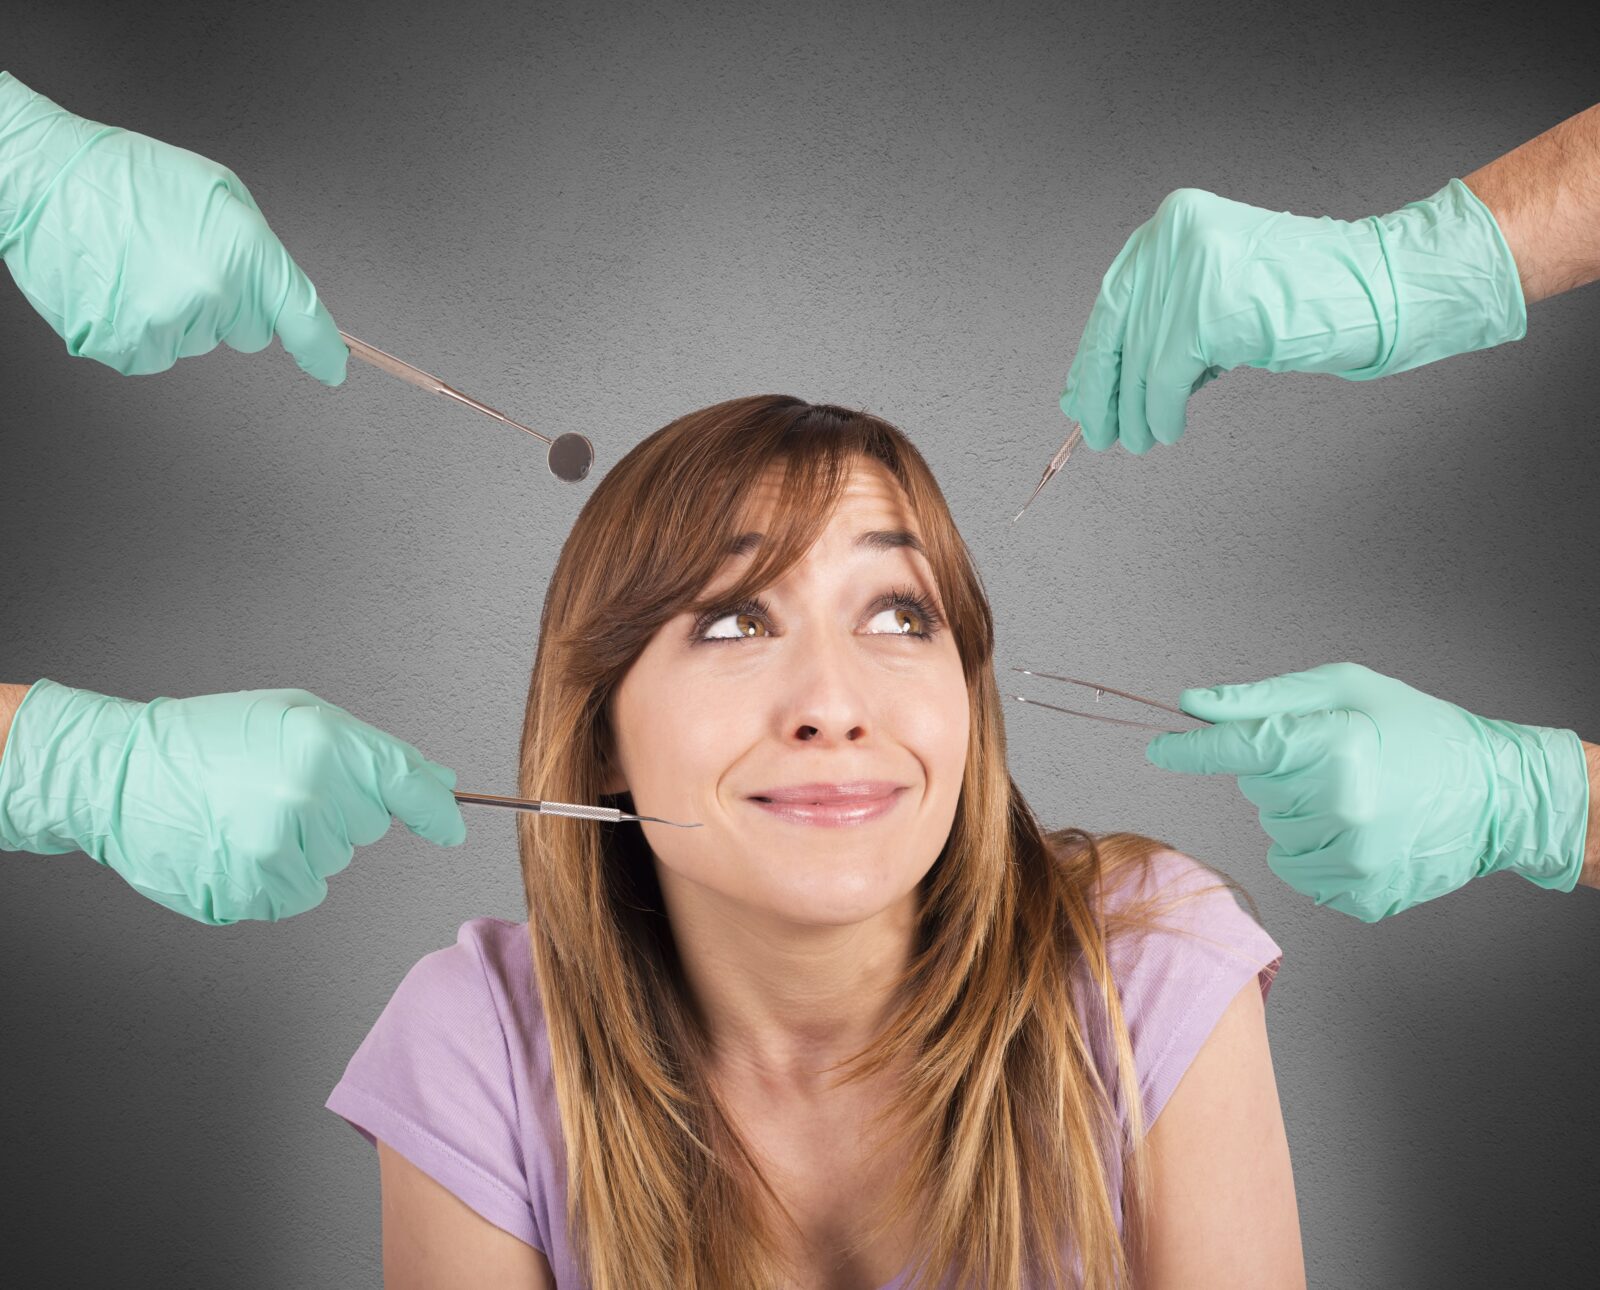 woman with anxiety surrounded by dental tools